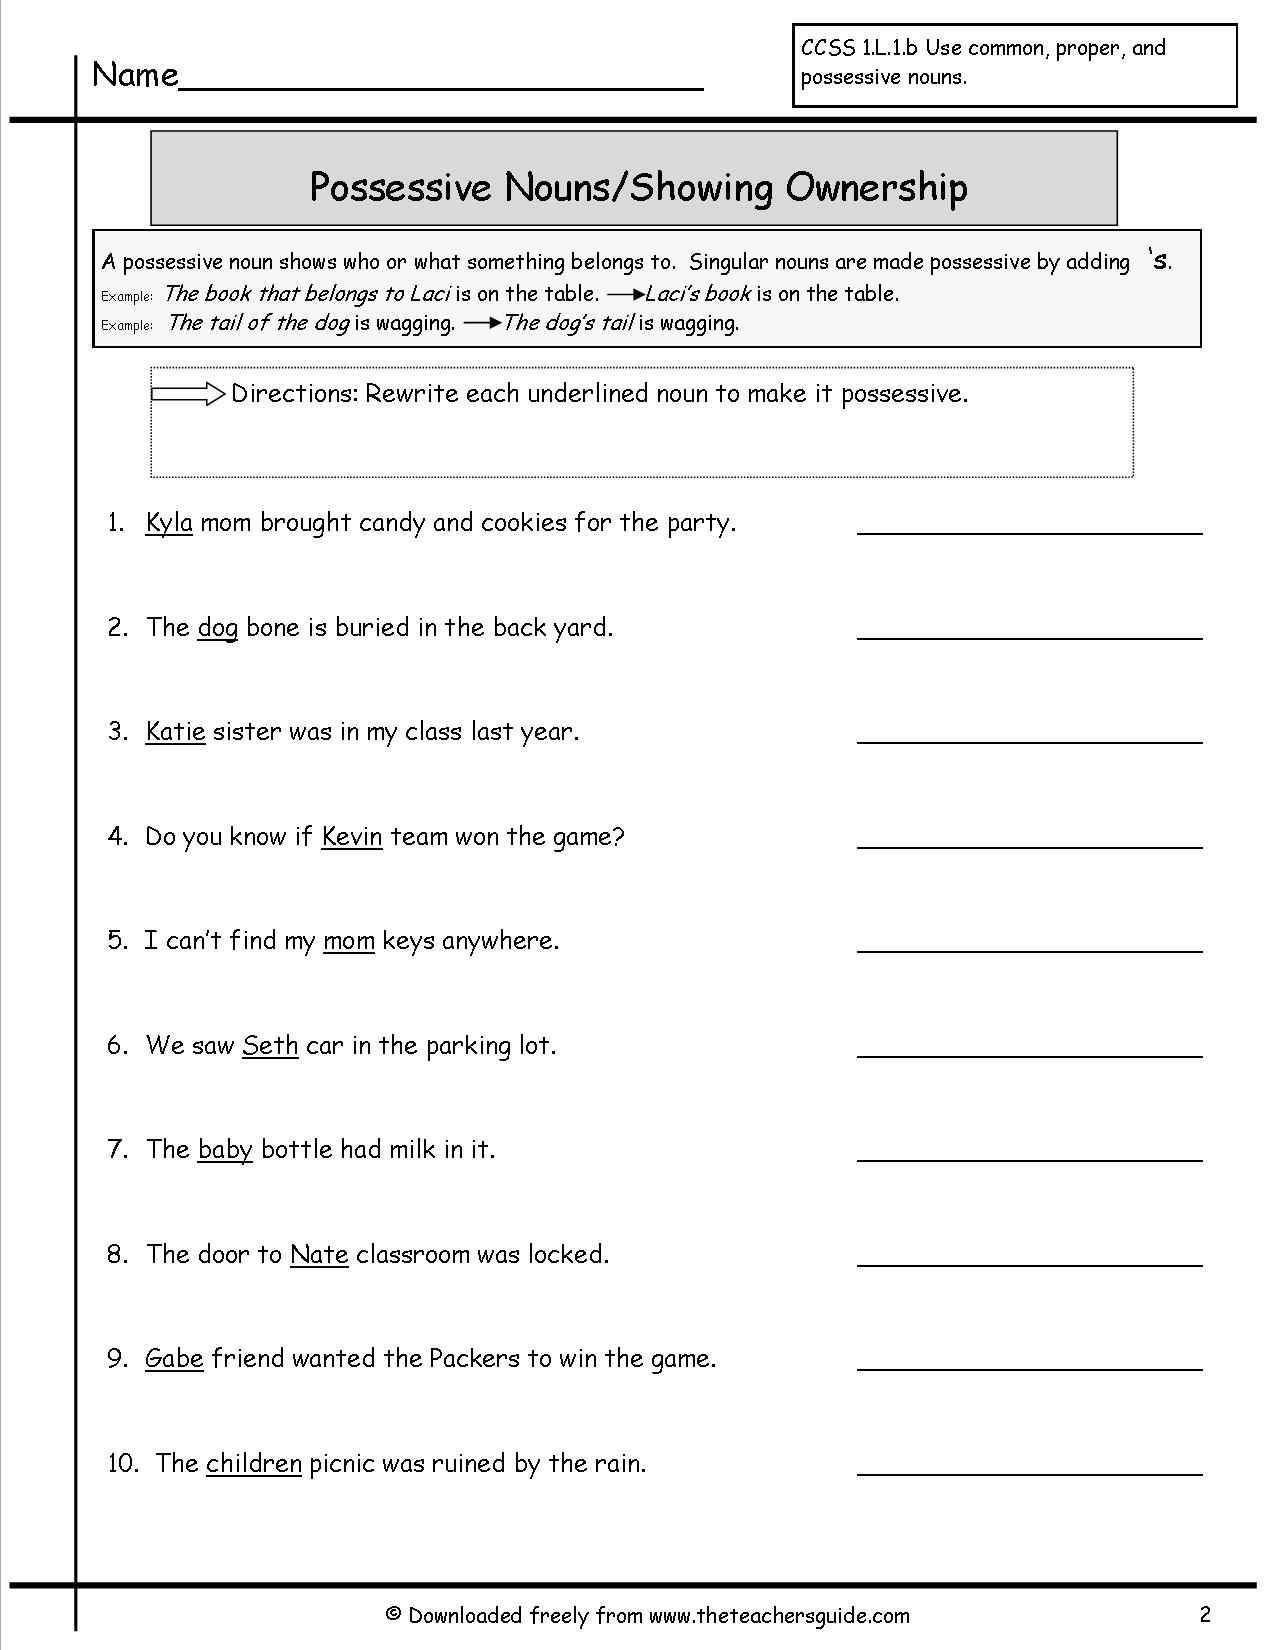 15-best-images-of-proper-pronouns-worksheets-2nd-grade-pronoun-worksheet-contraction-or